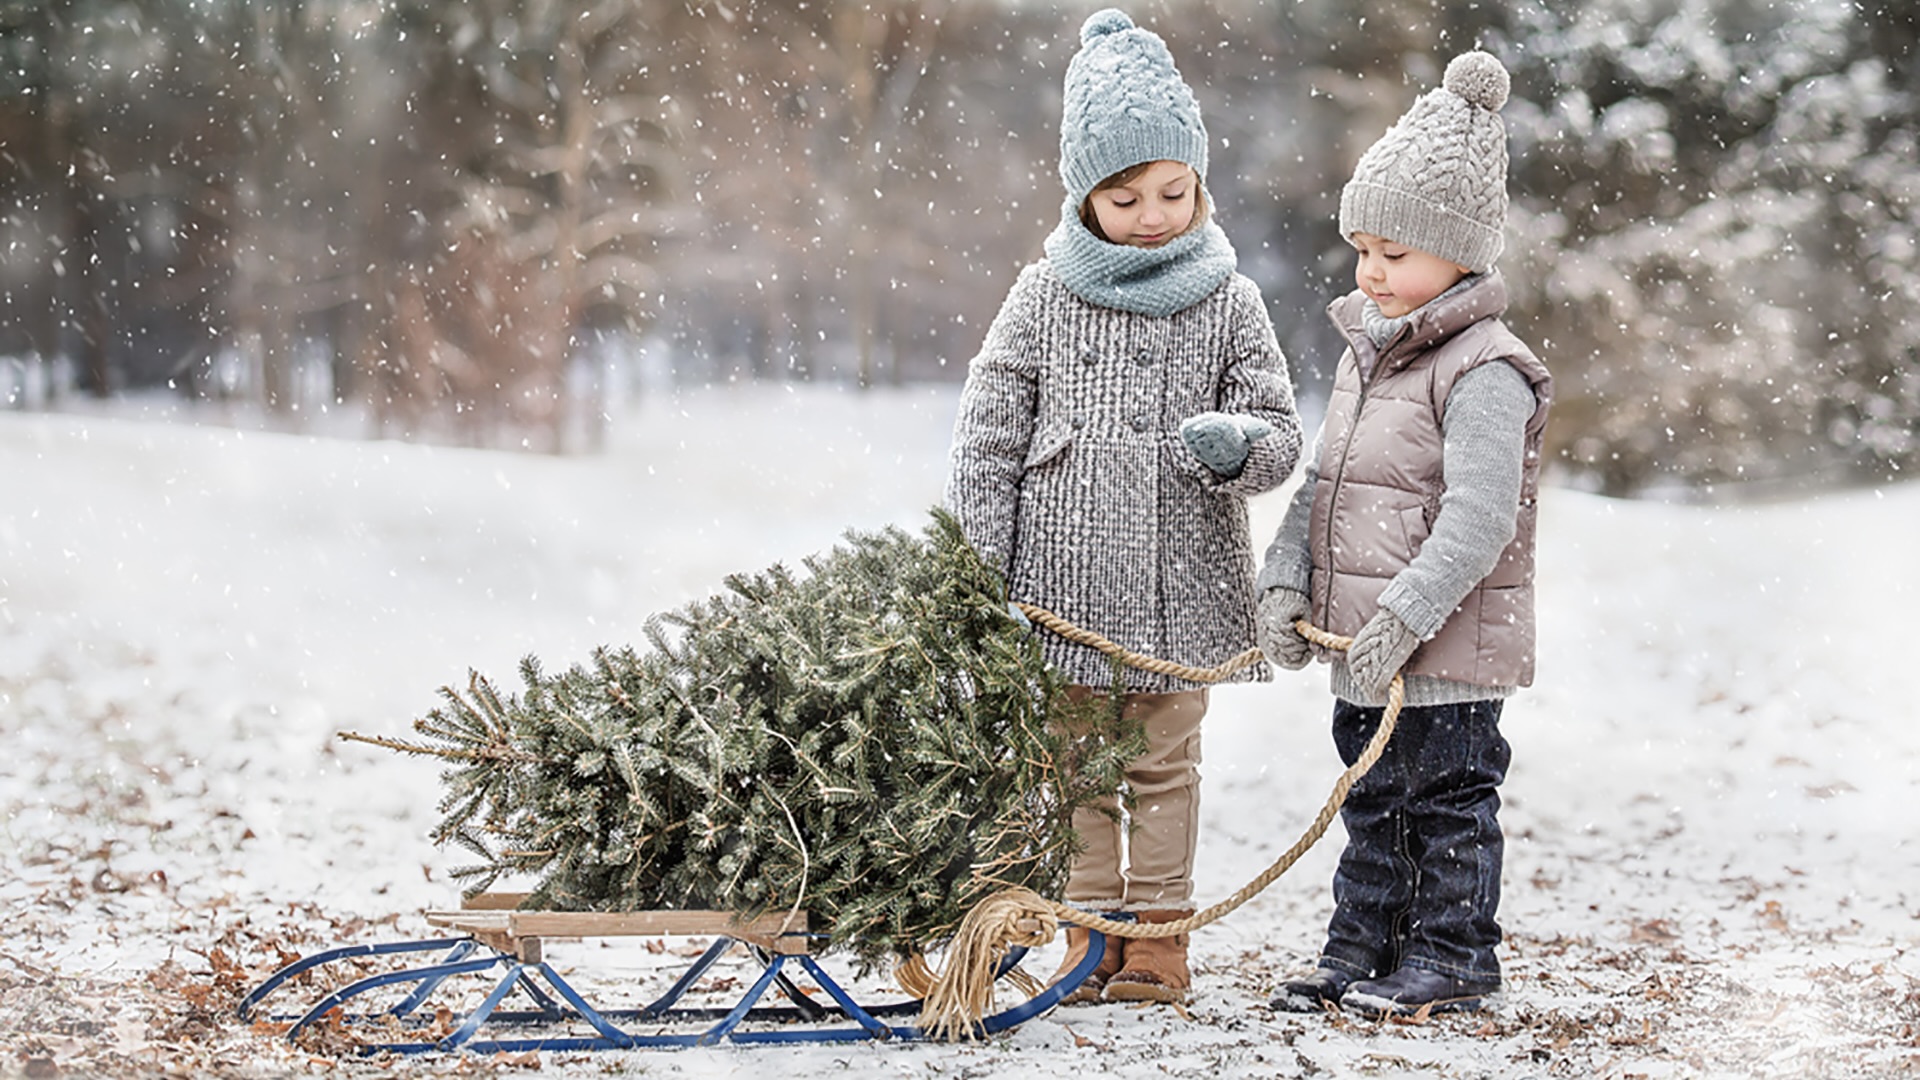 Eight tips for photographing your family around the holidays